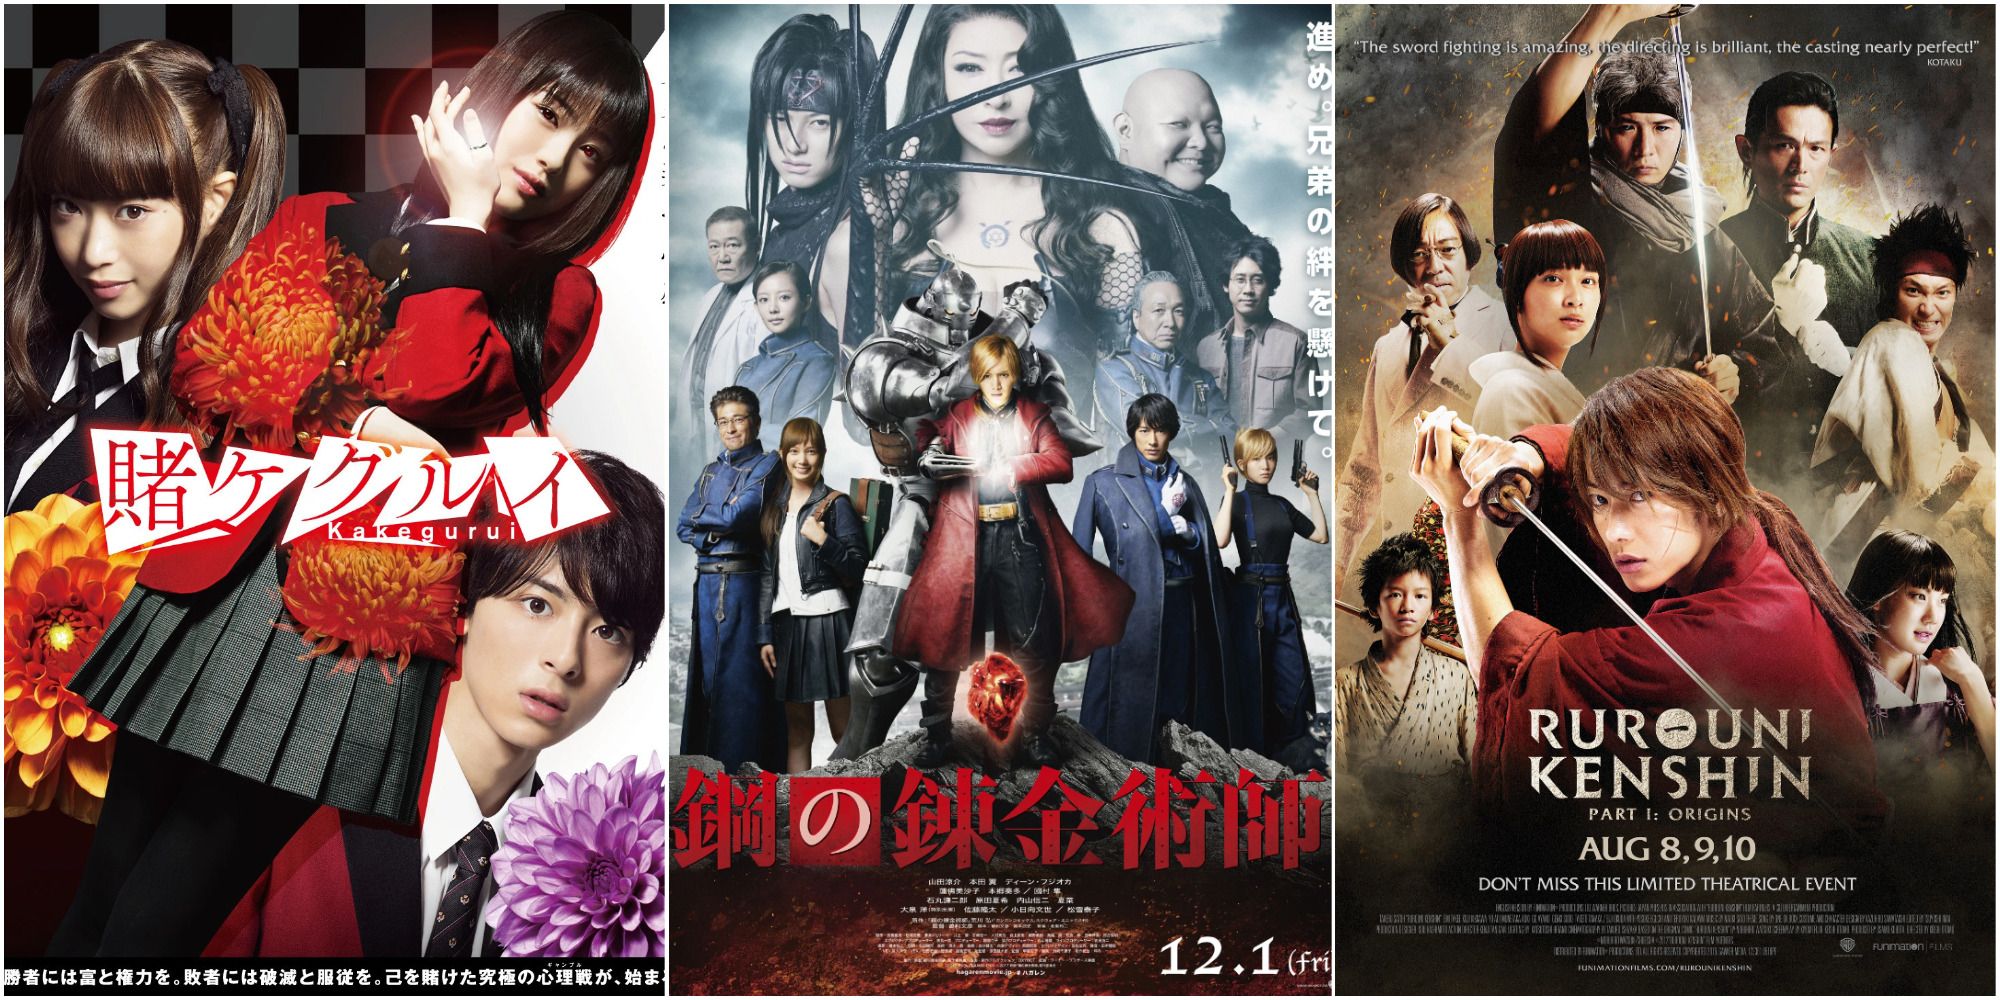 5 Anime That Have A Great Live-Action Adaptions (& 5 That Fell Flat)